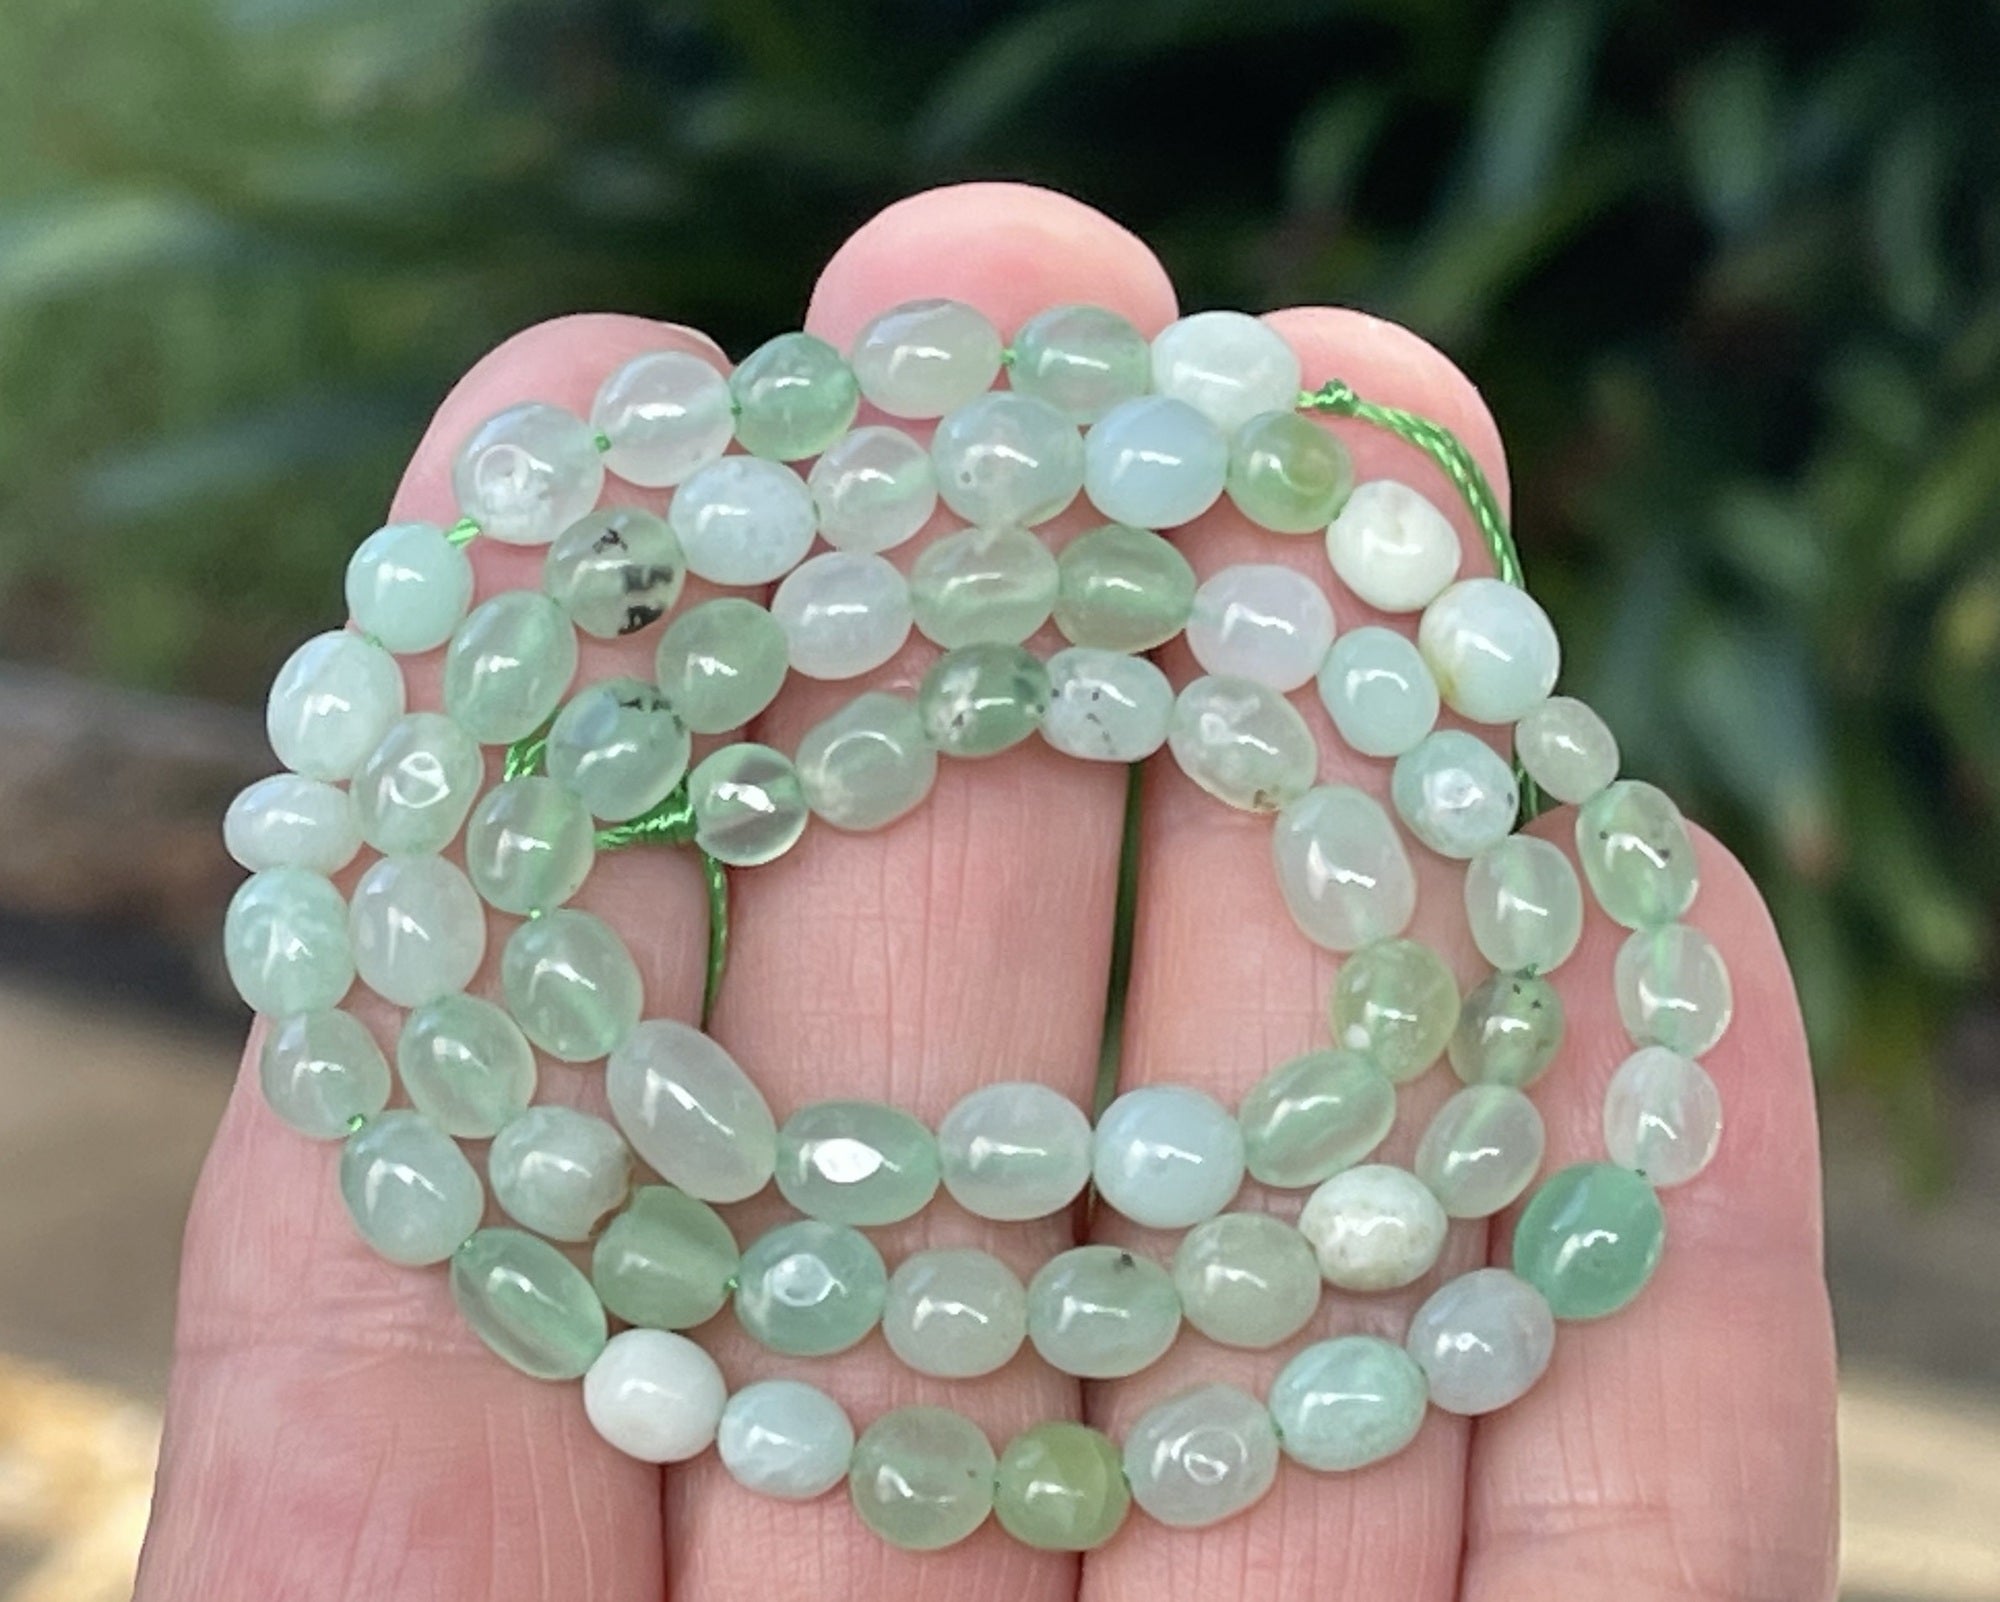 Chrysoprase 5-6mm tiny nuggets mint apple green natural gemstone beads 16" strand - Oz Beads 